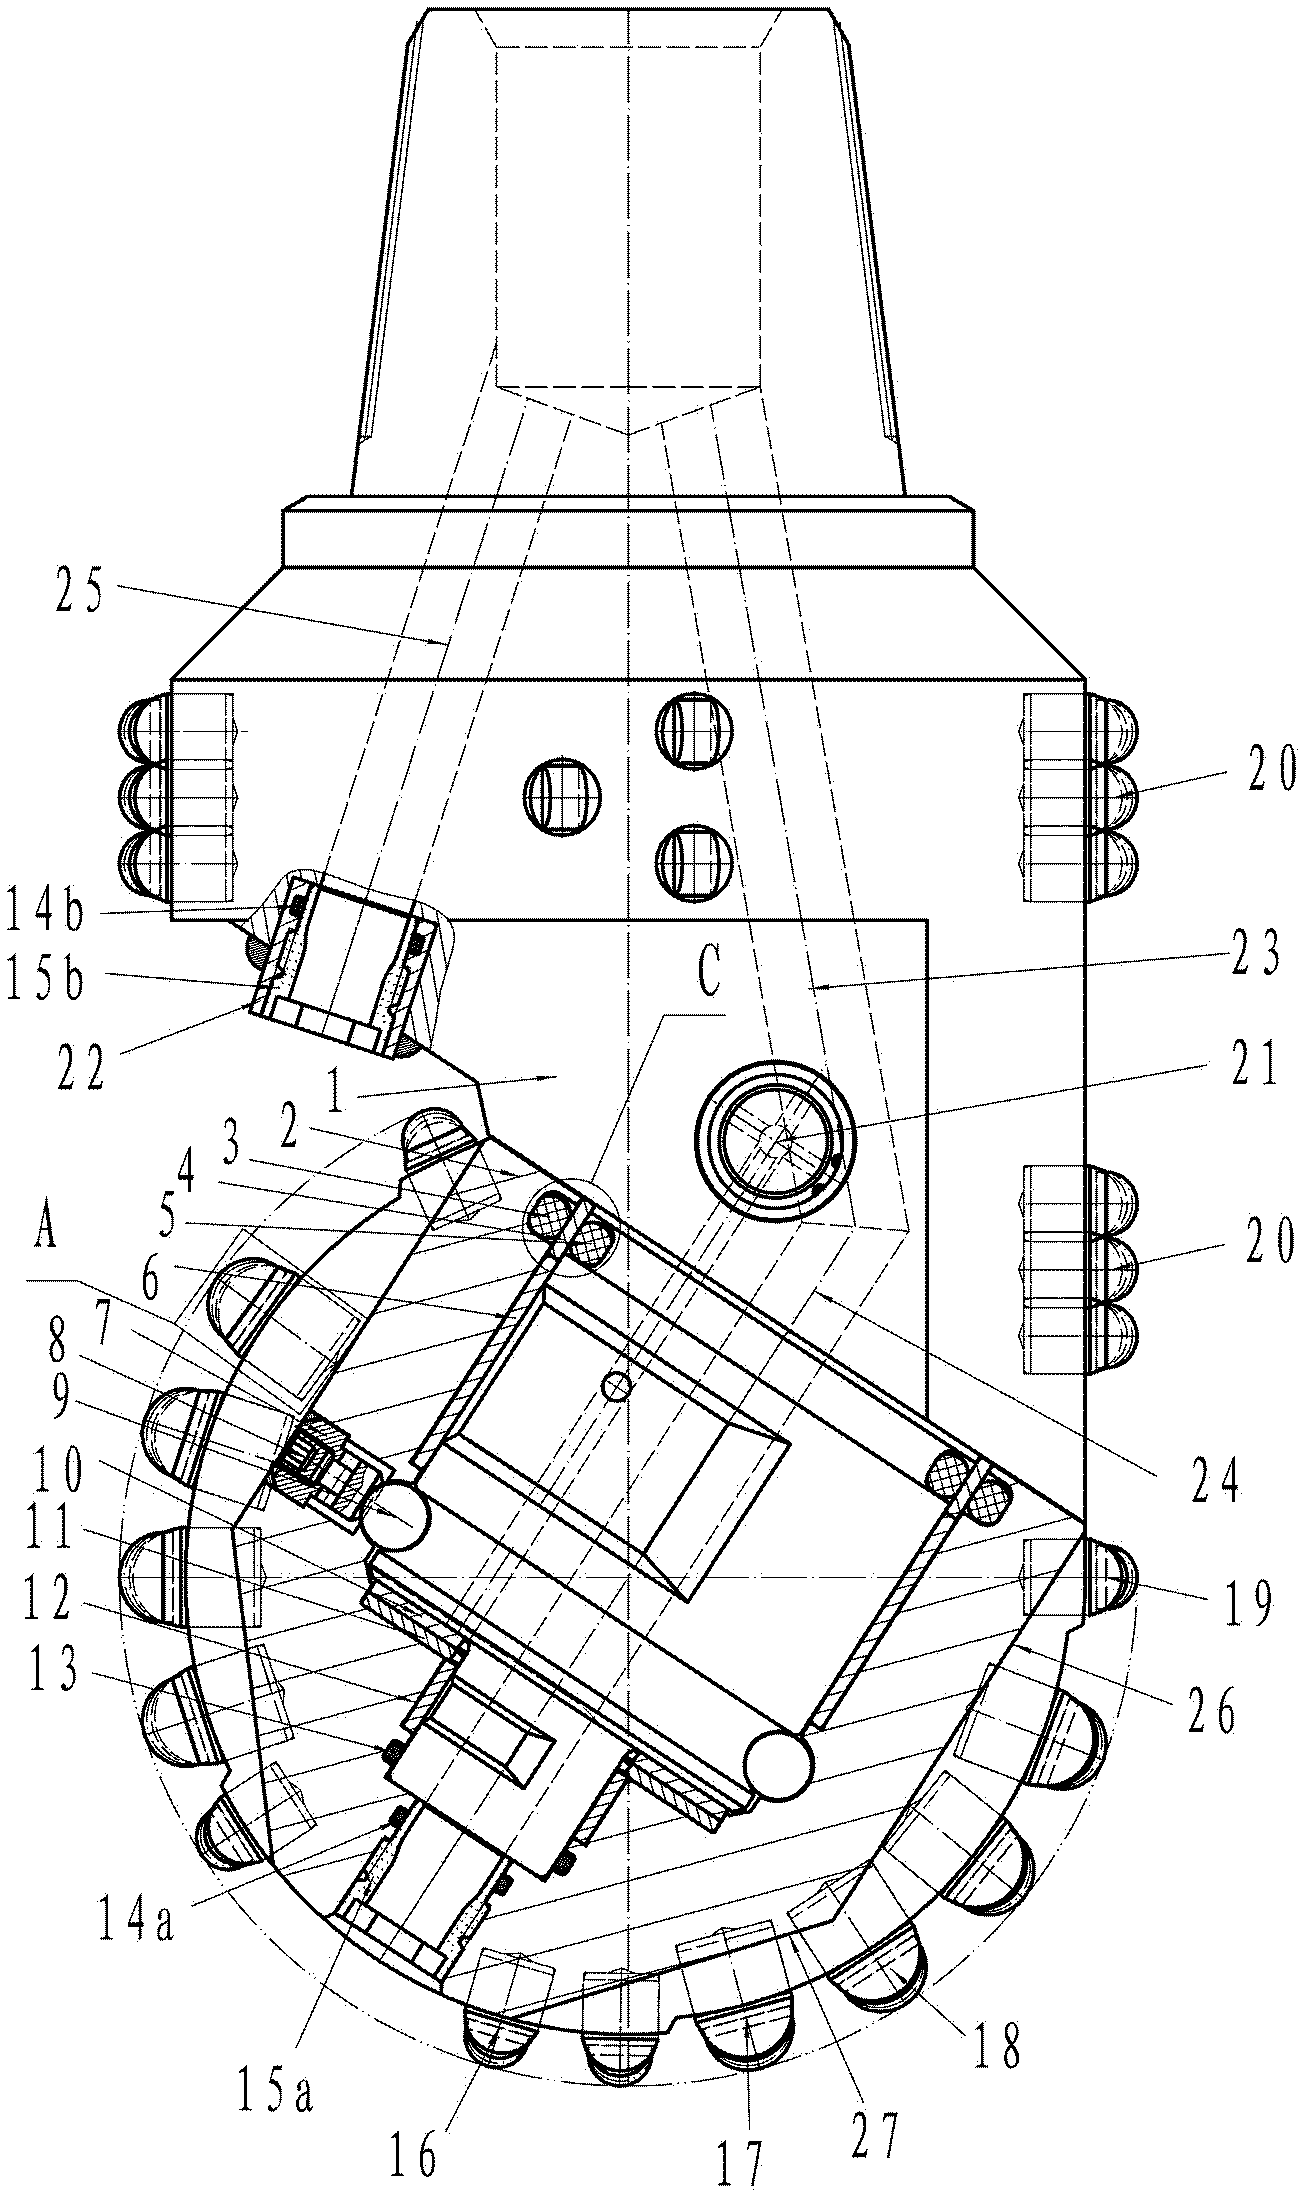 Single-roller bit with PDC (polycrystalline diamond compact) composite plates